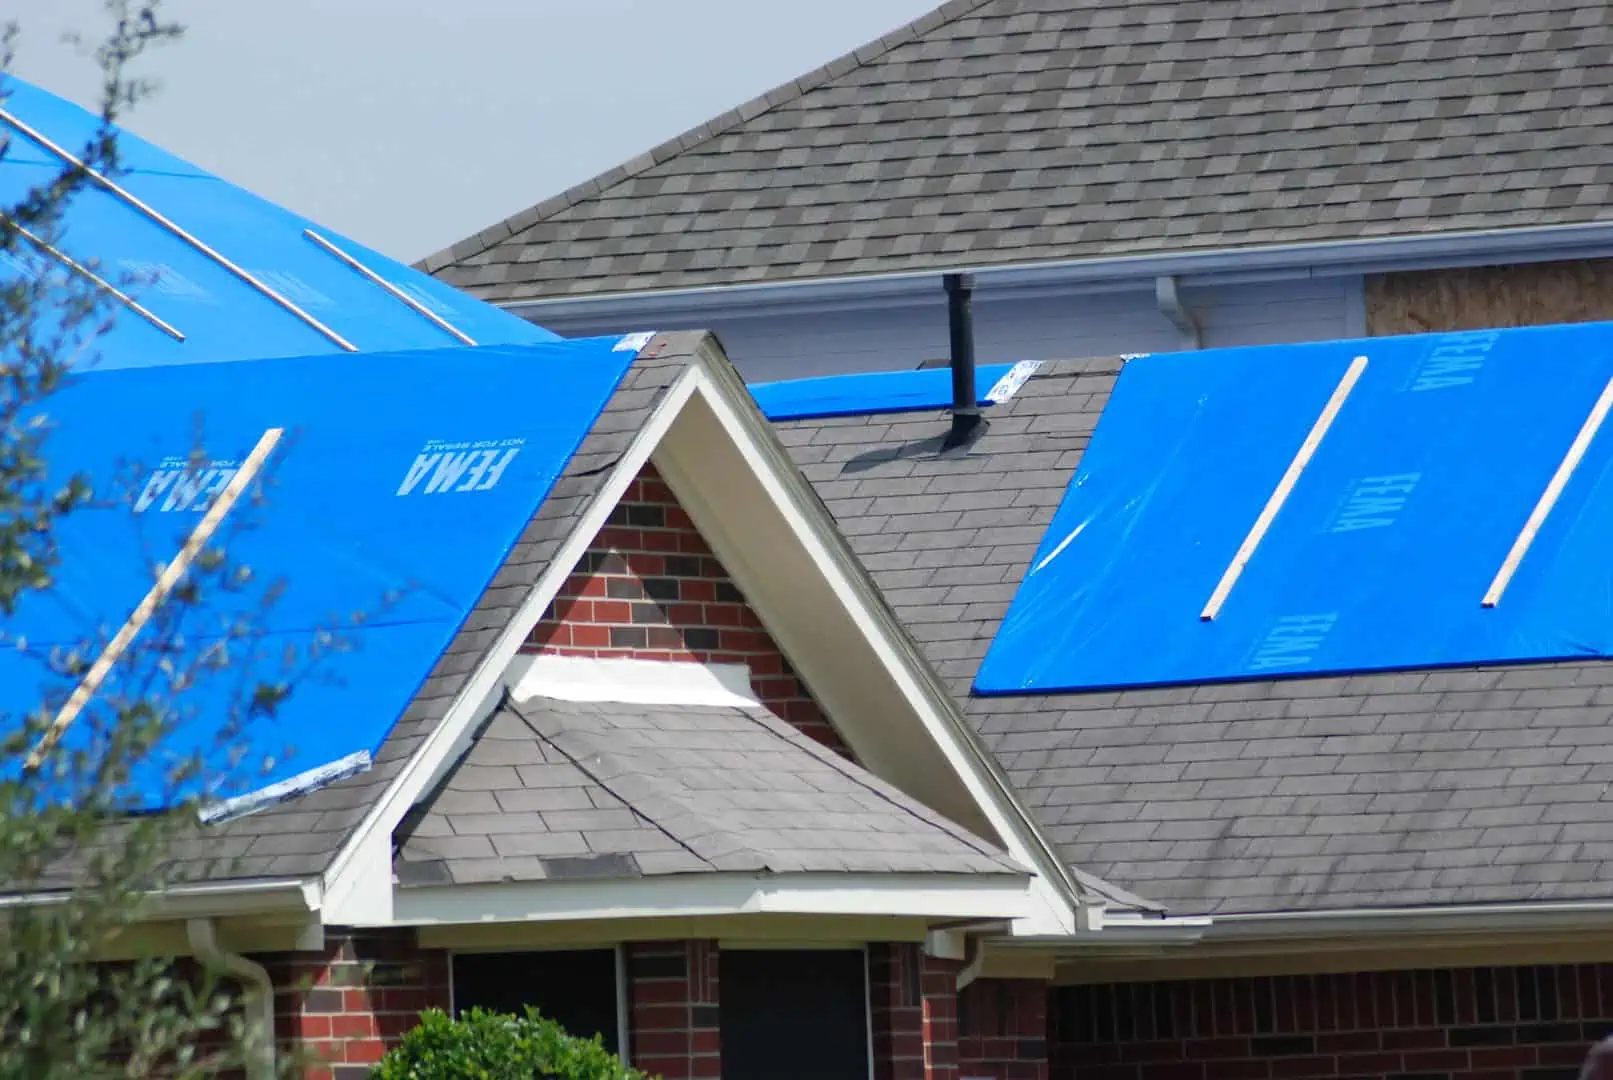 Roofs with storm damage covered with blue tarps